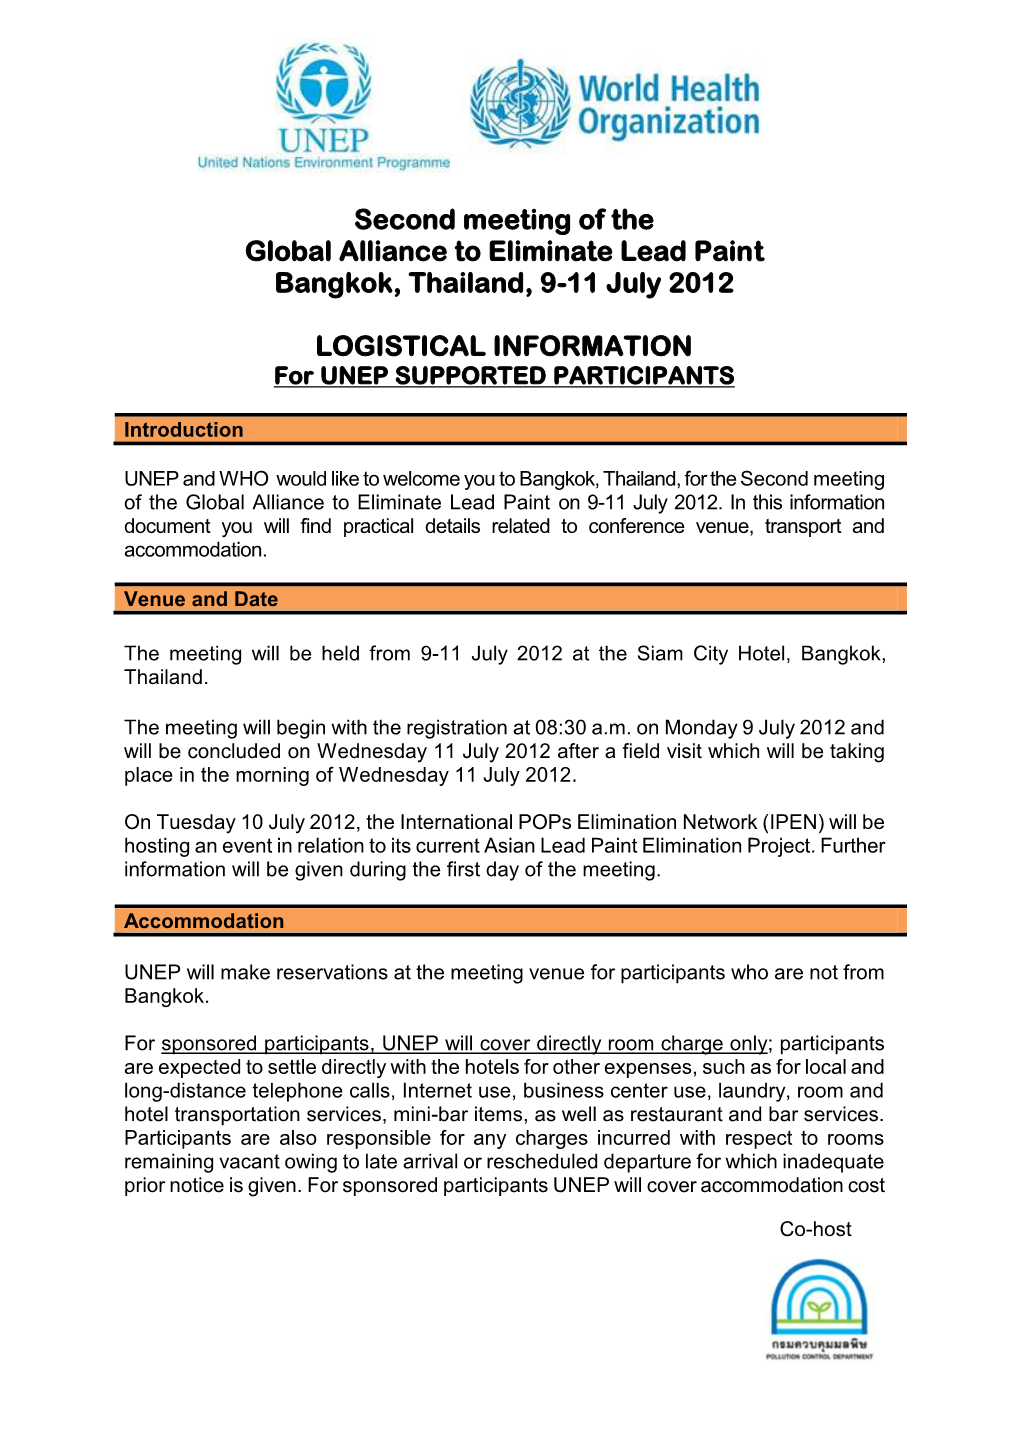 Second Meeting of the Global Alliance to Eliminate Lead Paint Bangkok, Thailand, 9-11 July 2012